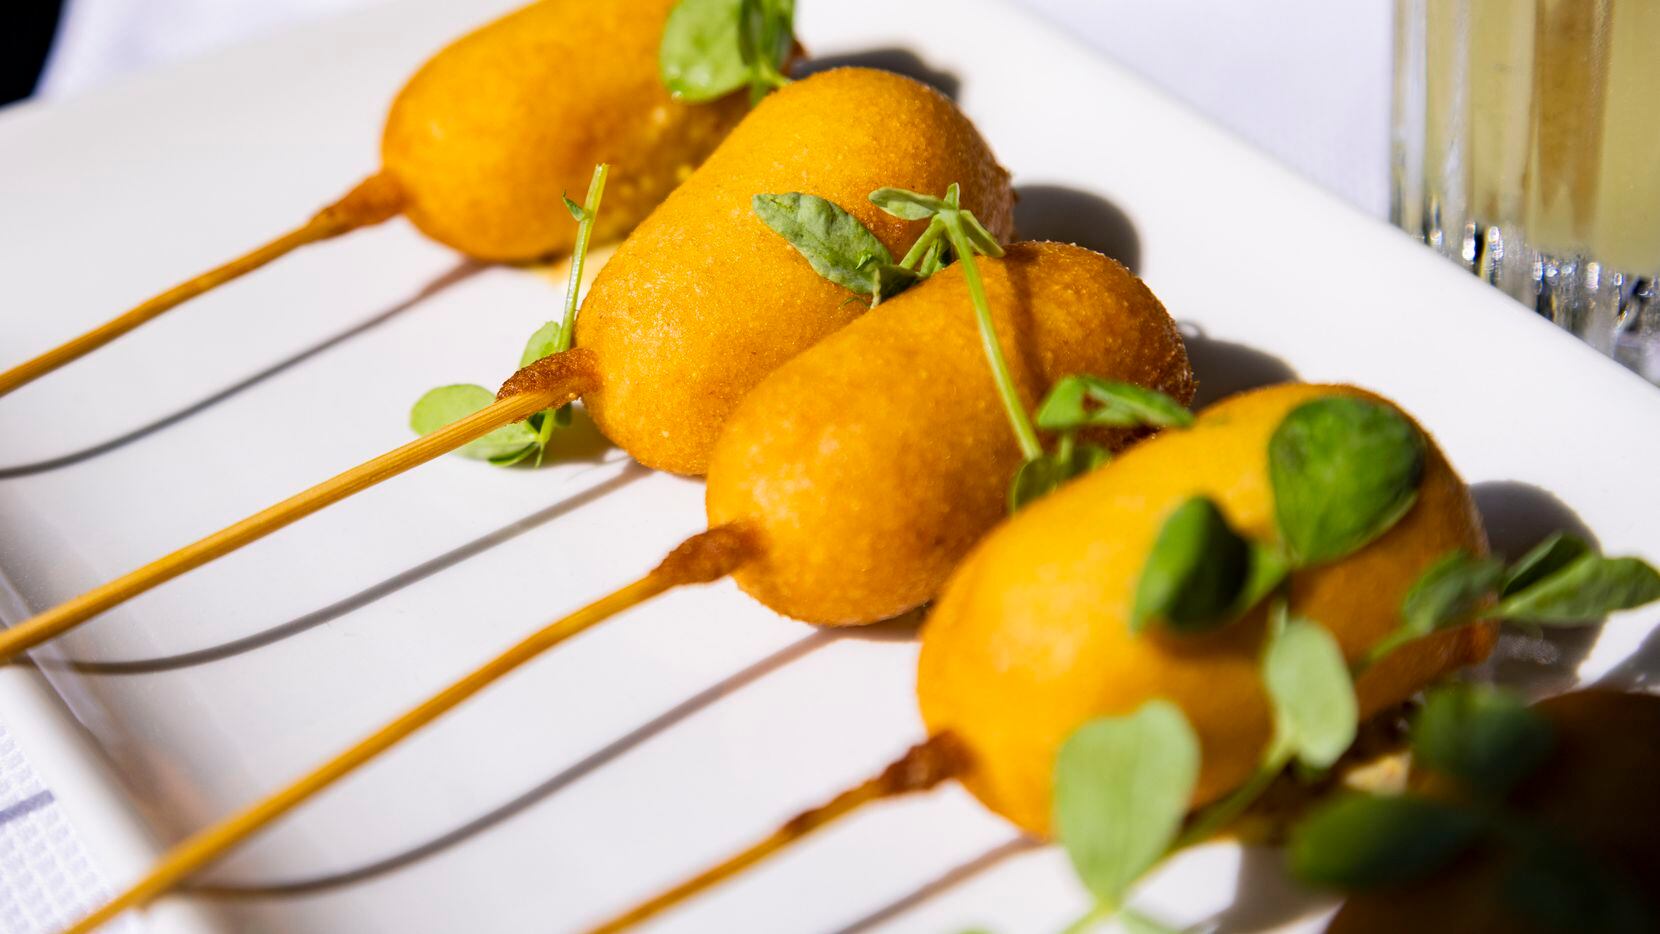 Corn dogs, but make them fancy? At Stillwell’s, inside the new Hotel Swexan, the corny dogs...